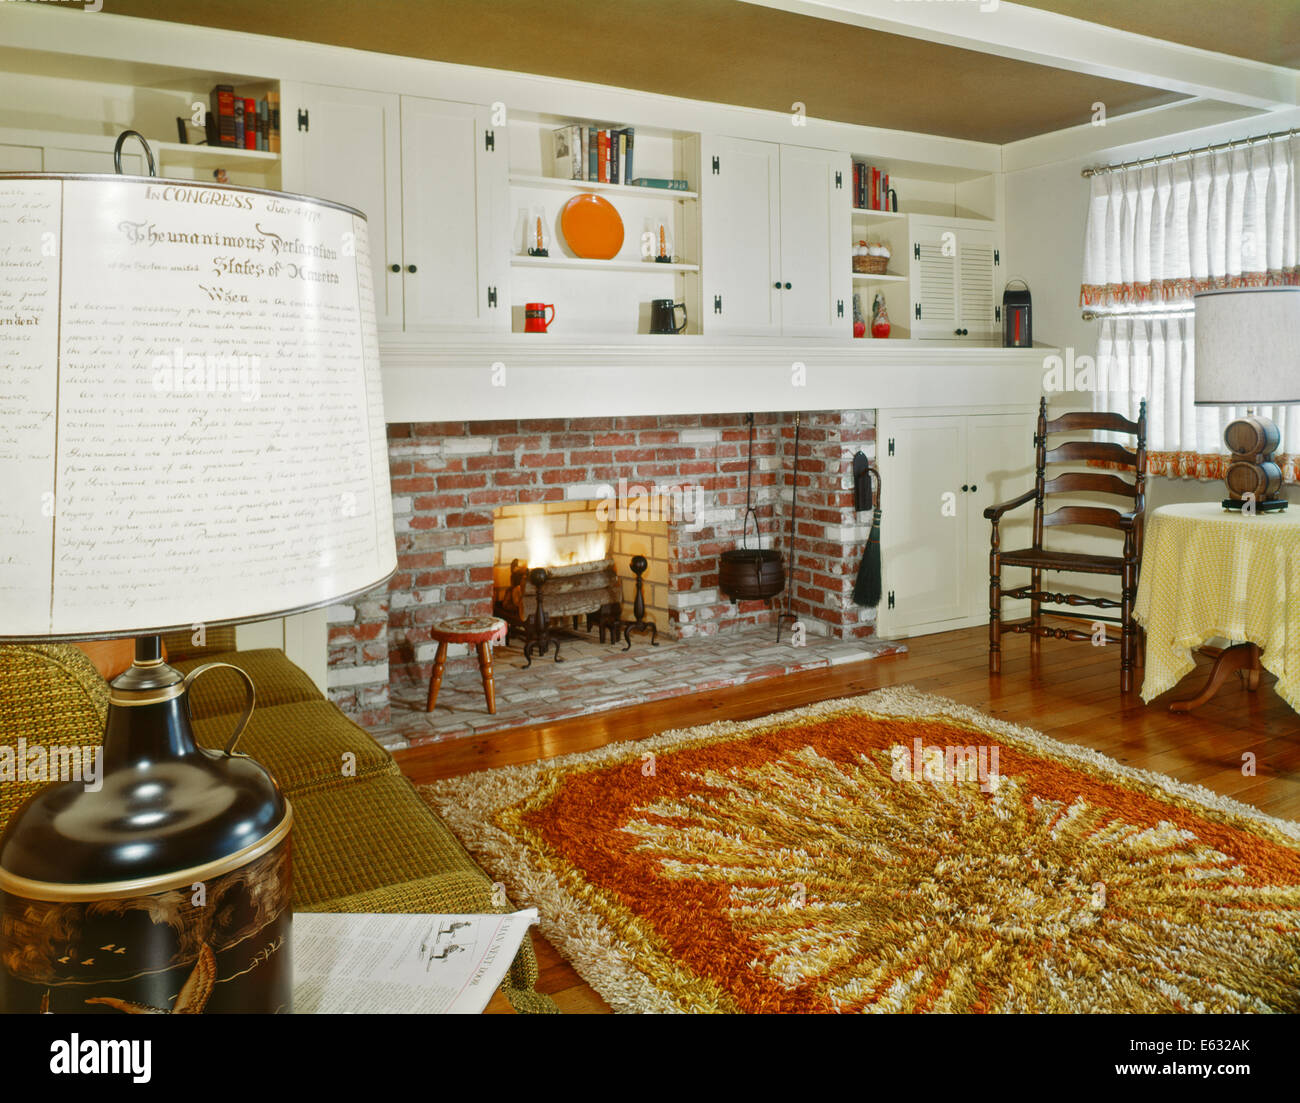 1960s INTERIOR OF LIVING ROOM WITH SHAG AREA RUG FIREPLACE AND ...